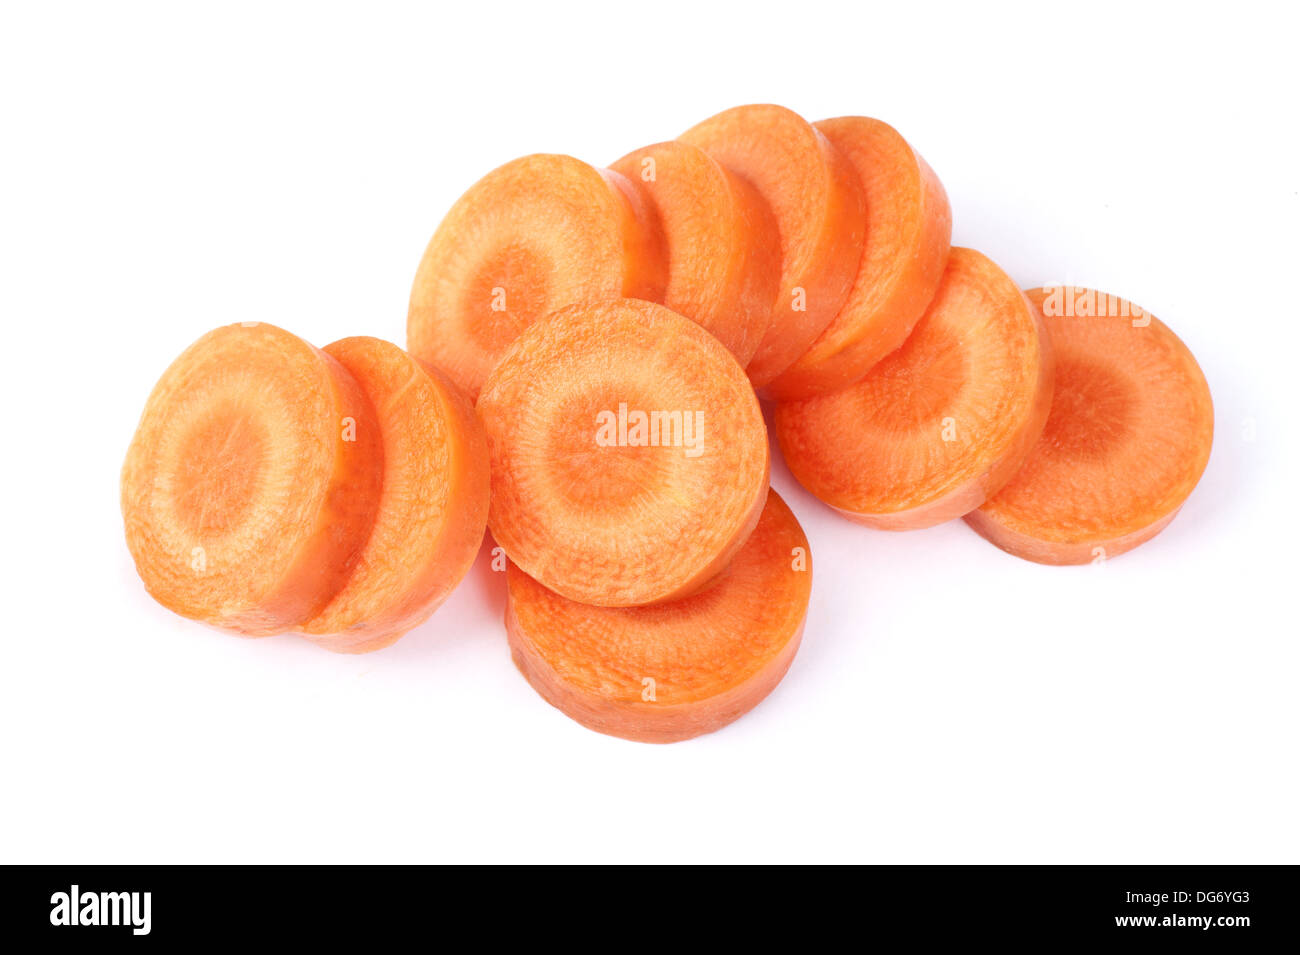 Carrots Chopped Into Thin Long Slices On Dish And Grater Stock Photo -  Download Image Now - iStock